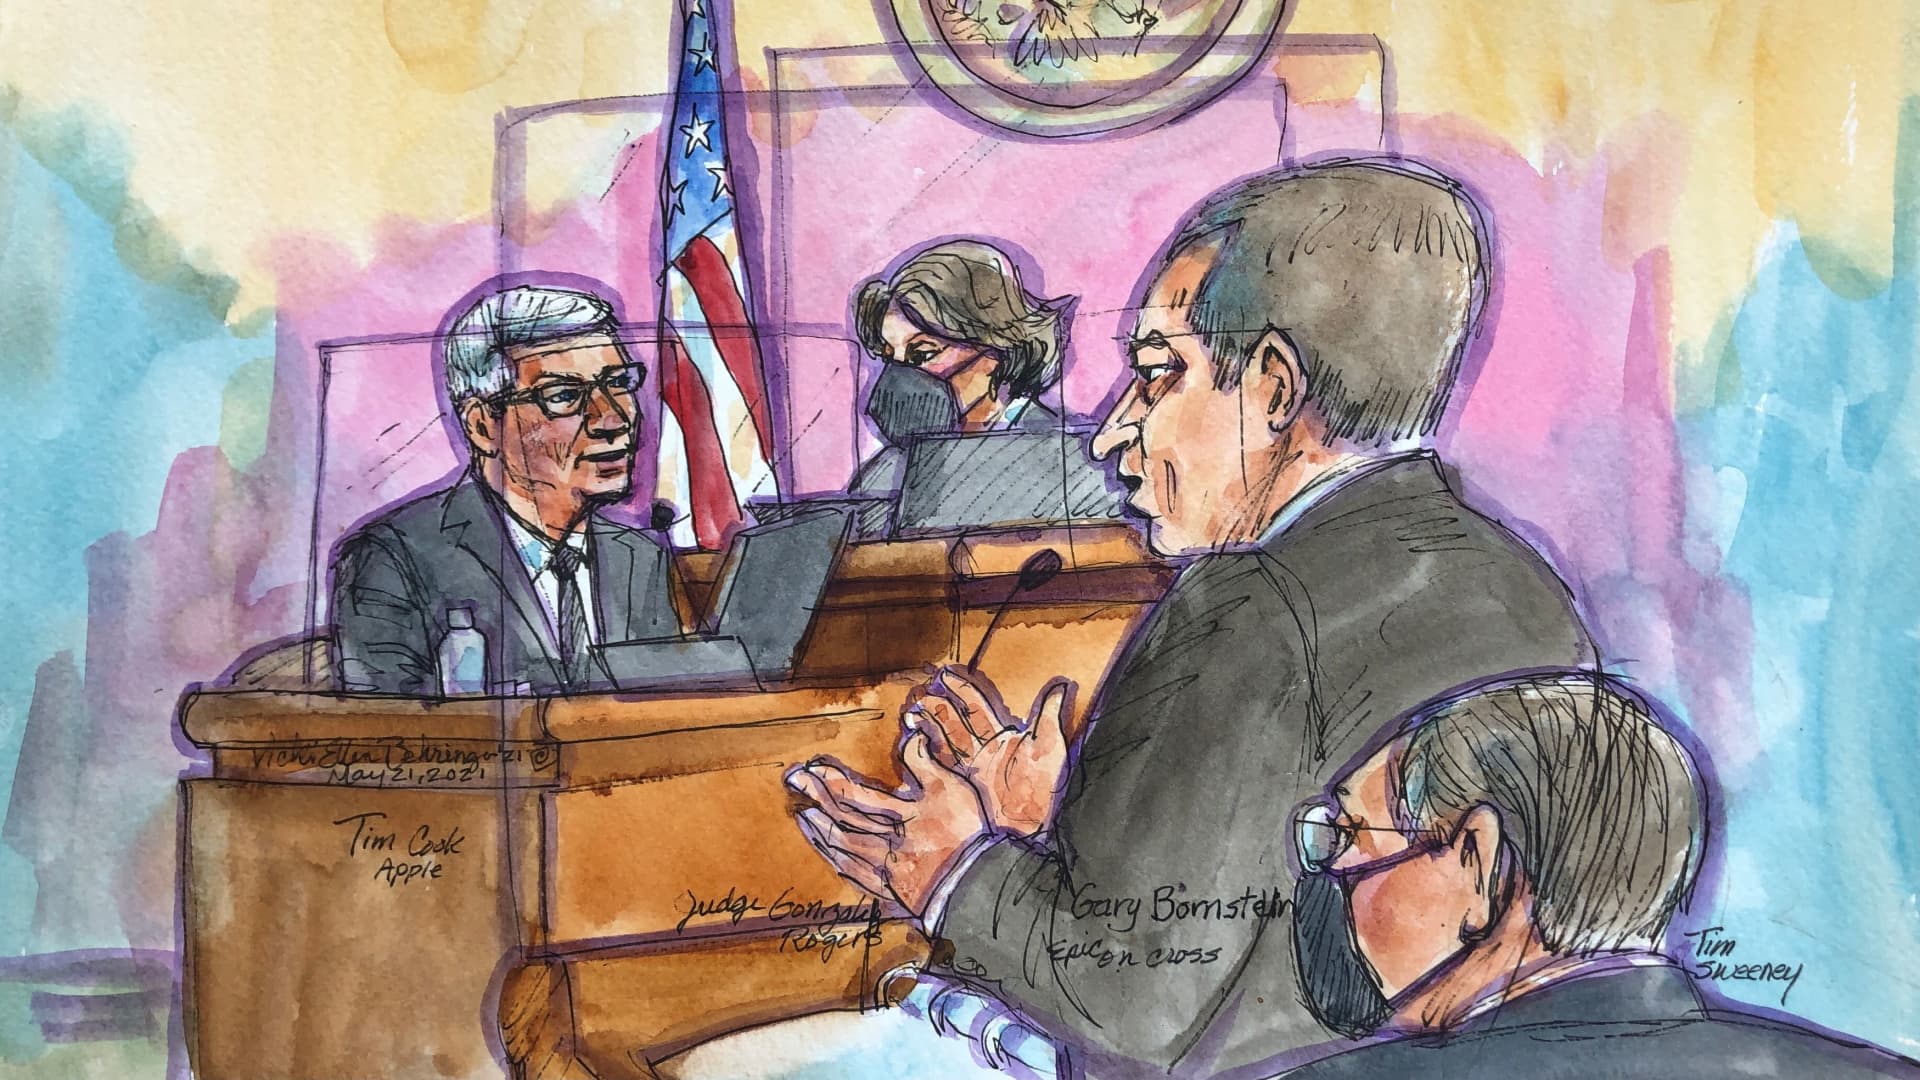 Apple CEO Tim Cook is cross examined by Gary Bornstein as he testifies on the stand during a weeks-long antitrust trial at federal court in Oakland, California, U.S. May 21, 2021 in this courtroom sketch.